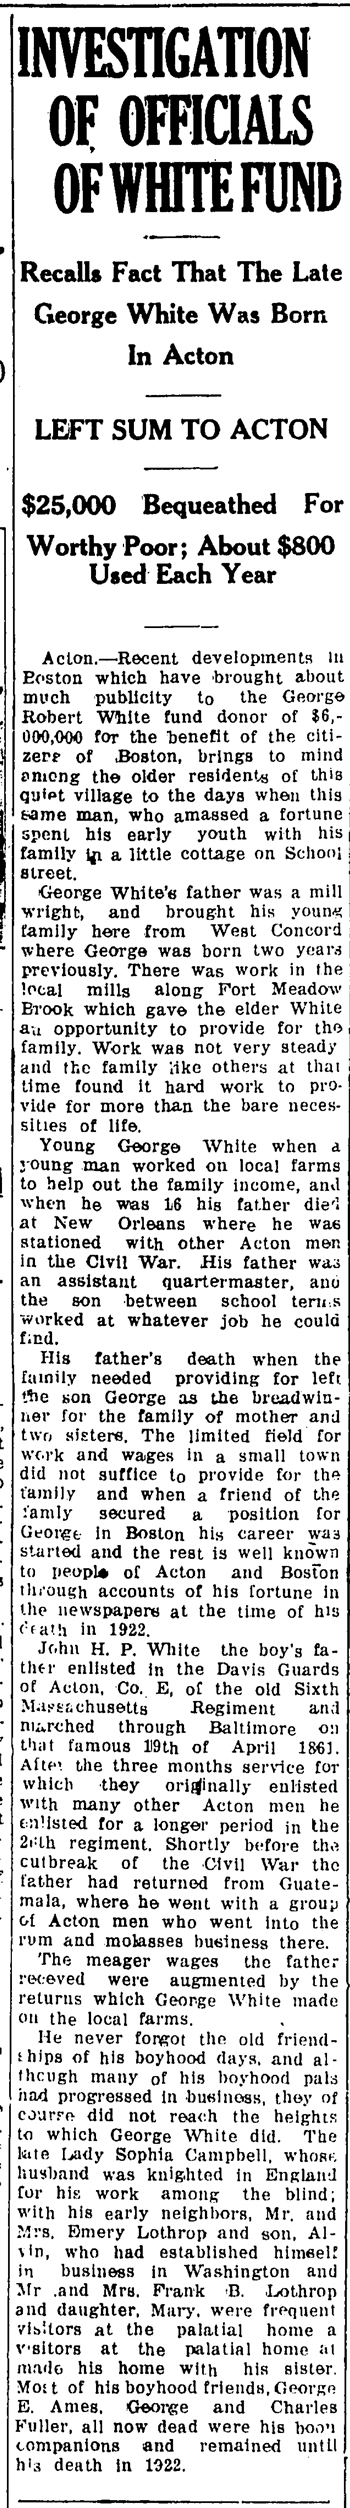 News clipping from the Acton Enterprise, Aug. 18, 1937